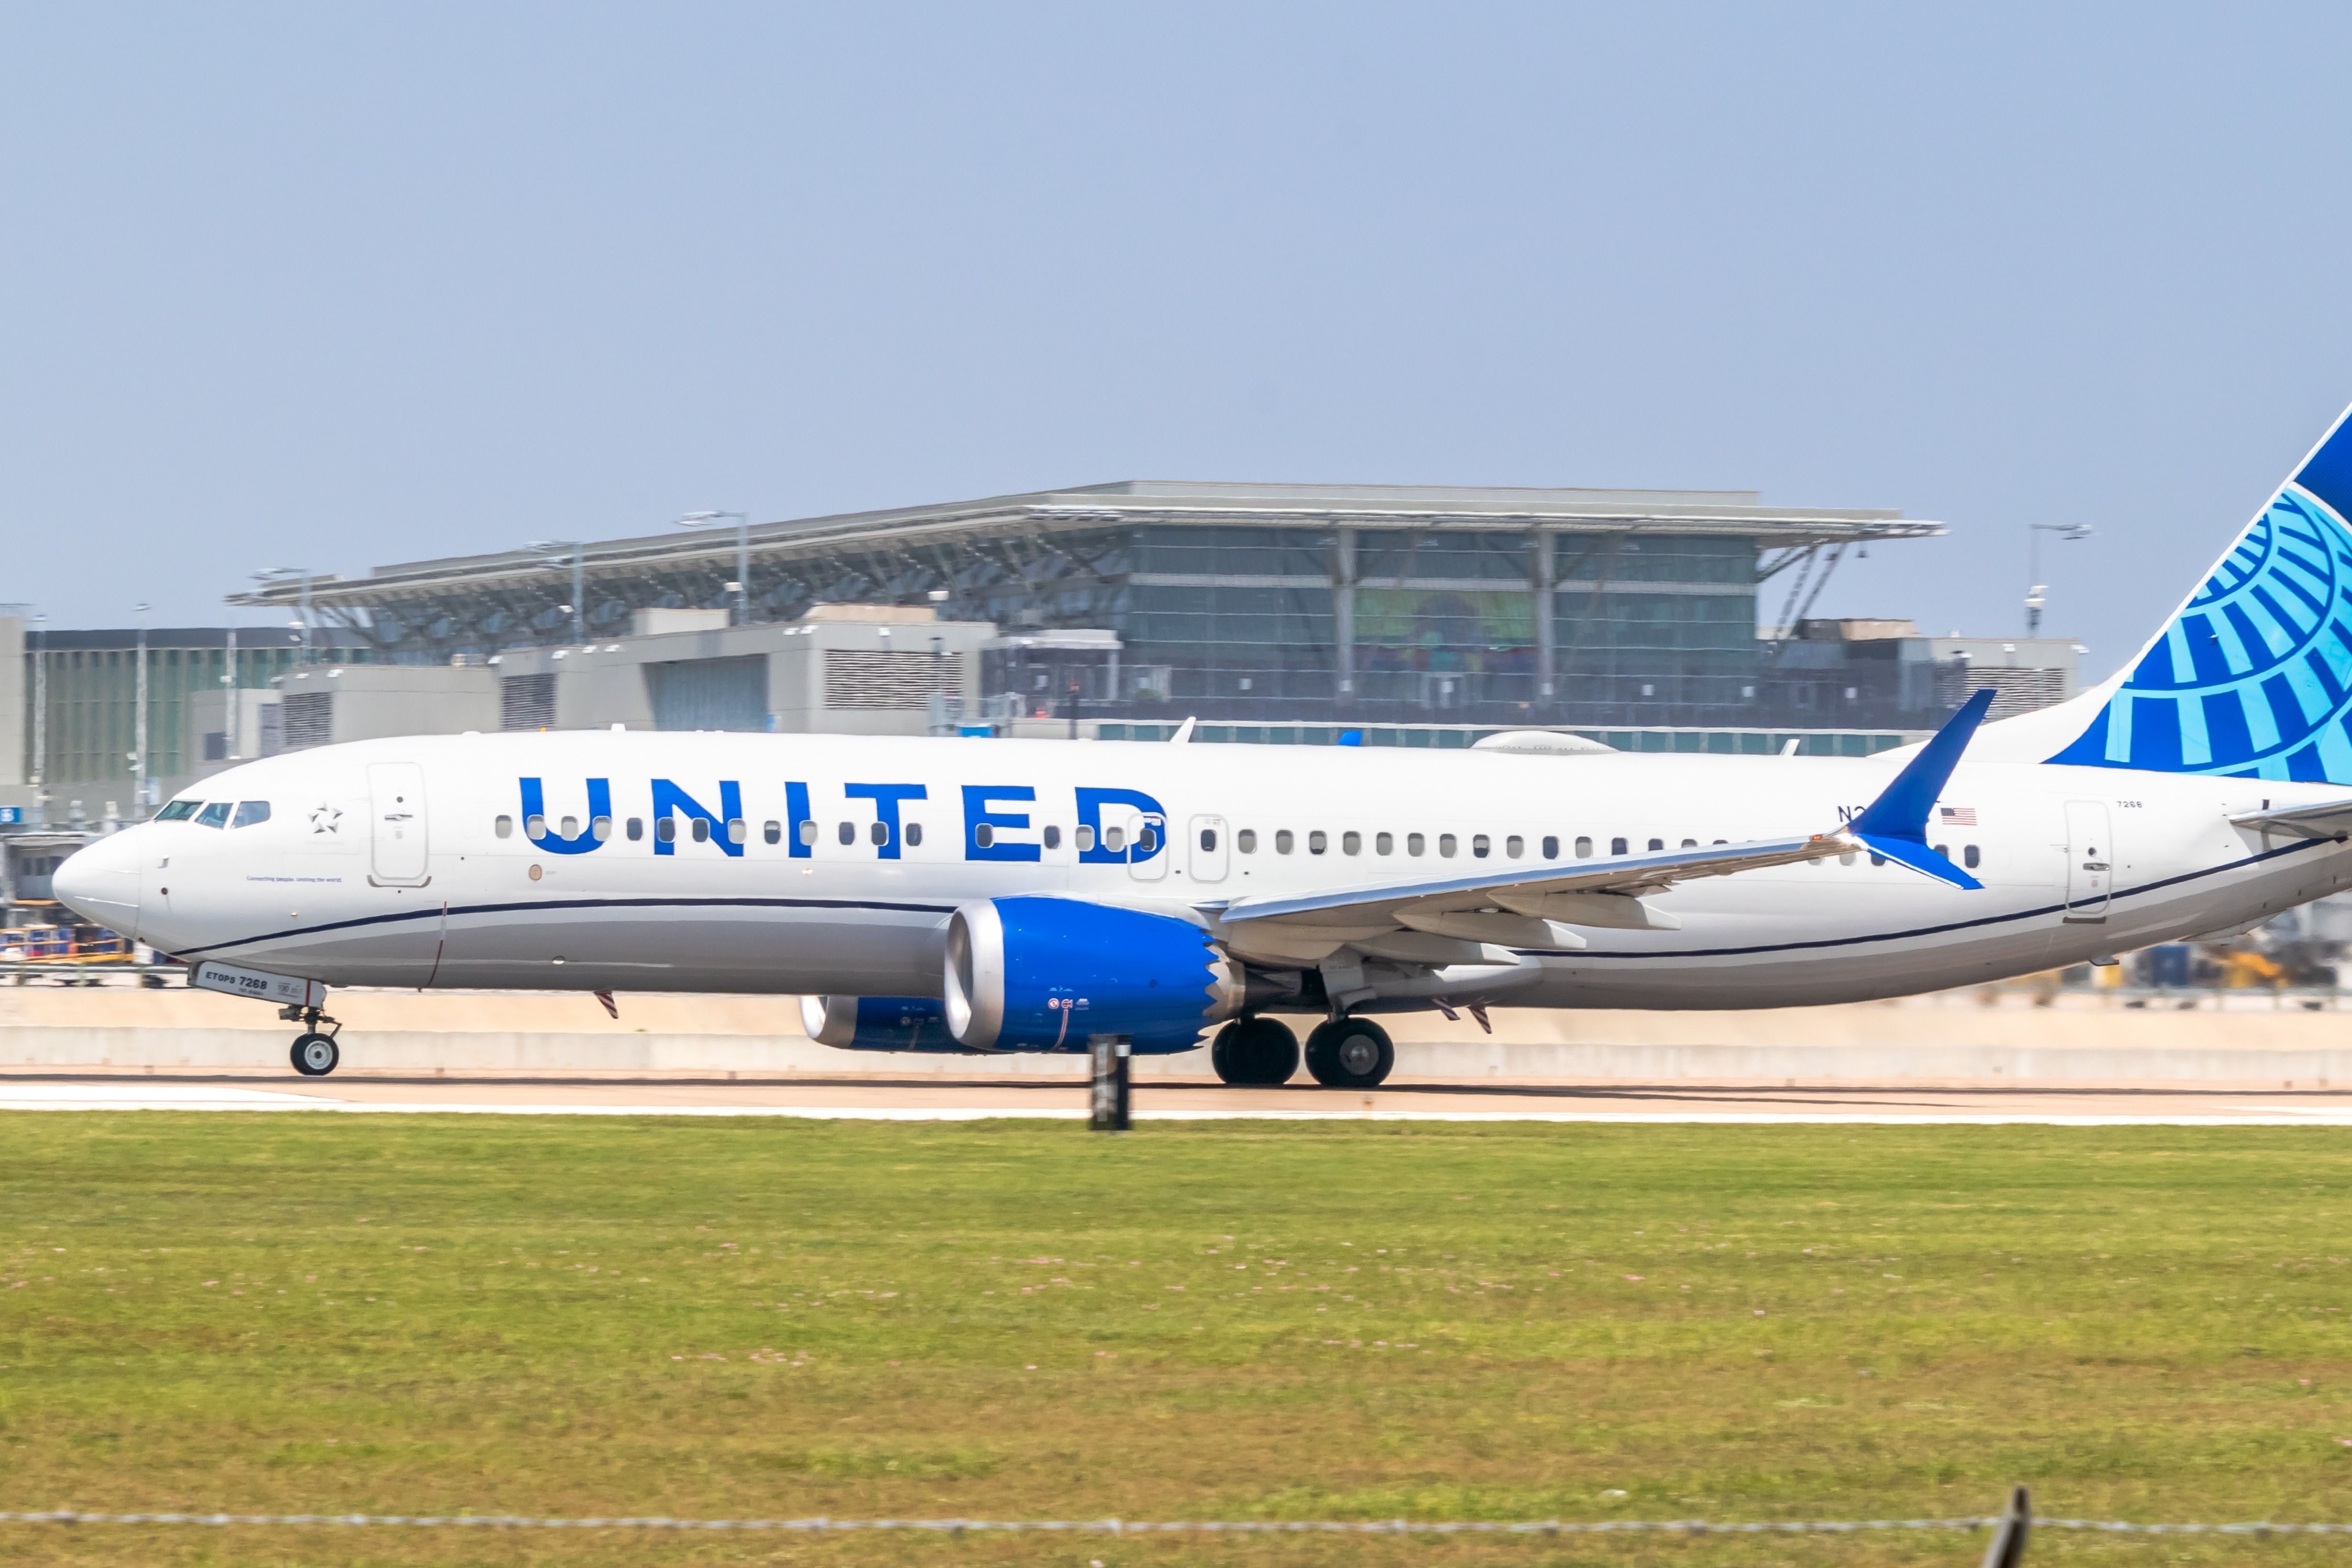 A United Airlines Boeing 737 MAX 8 on an airport apron.